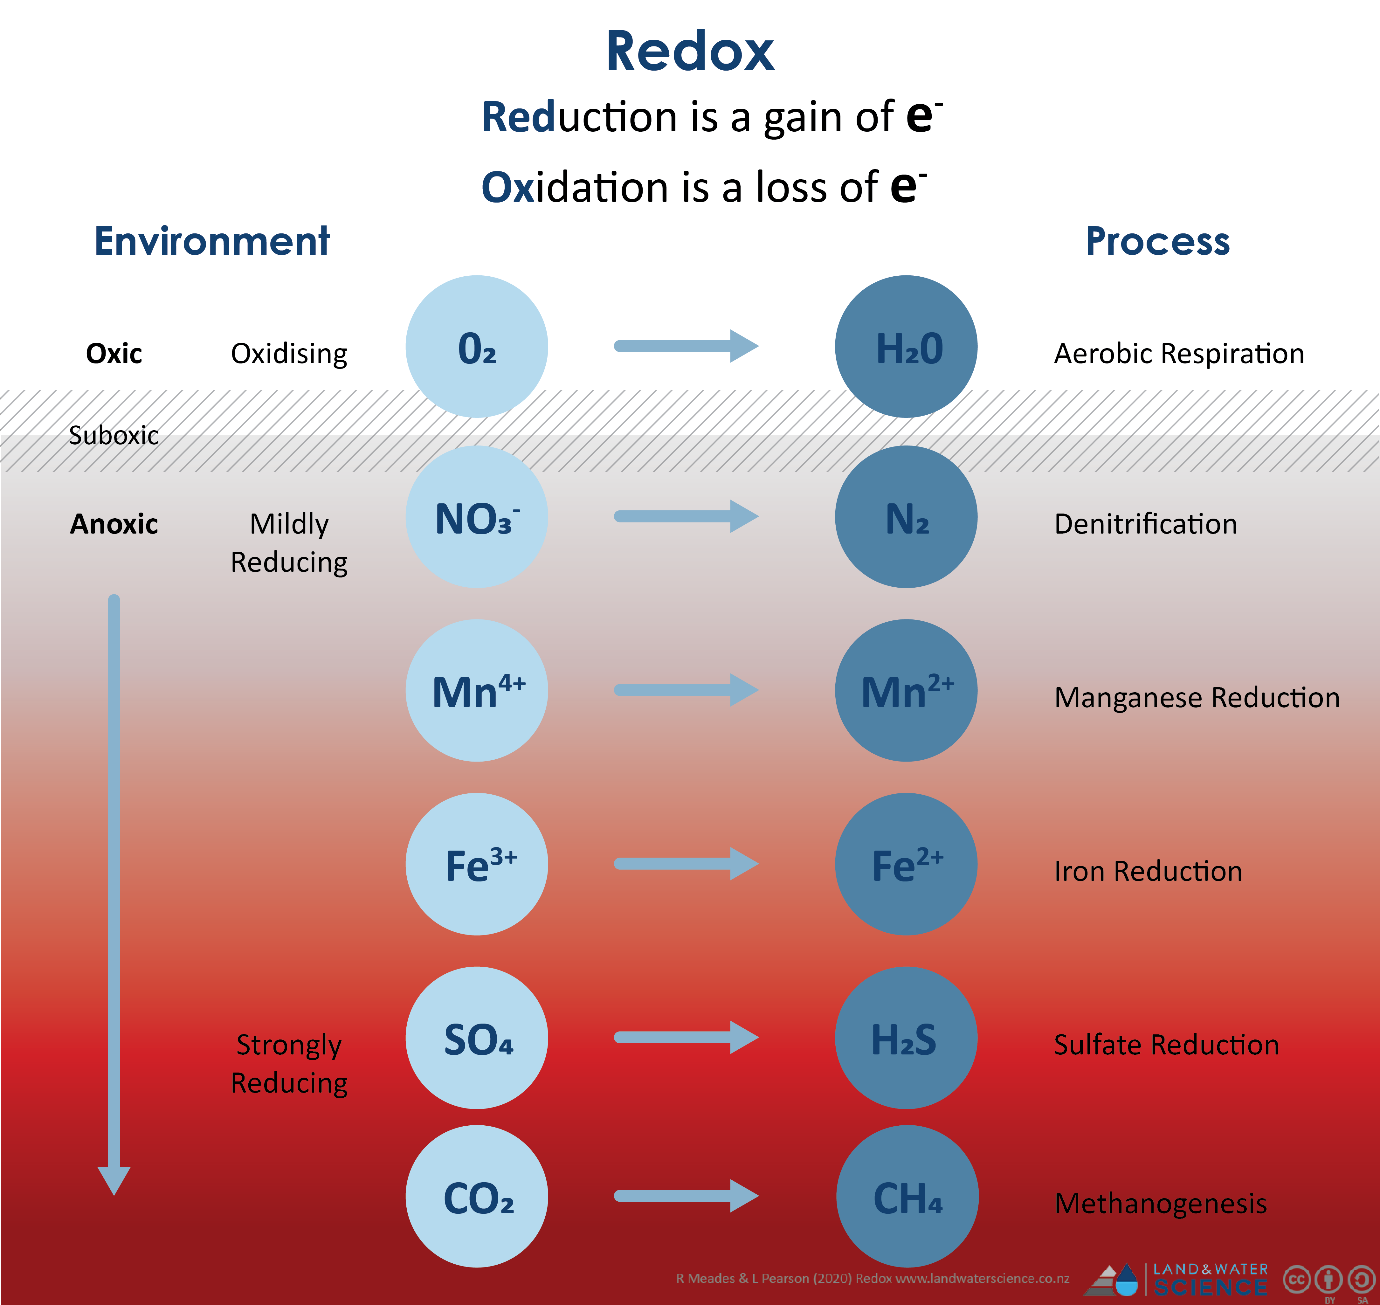 2D diagram of different elements undergoing either Reduction or Oxidisation in different soil environments.